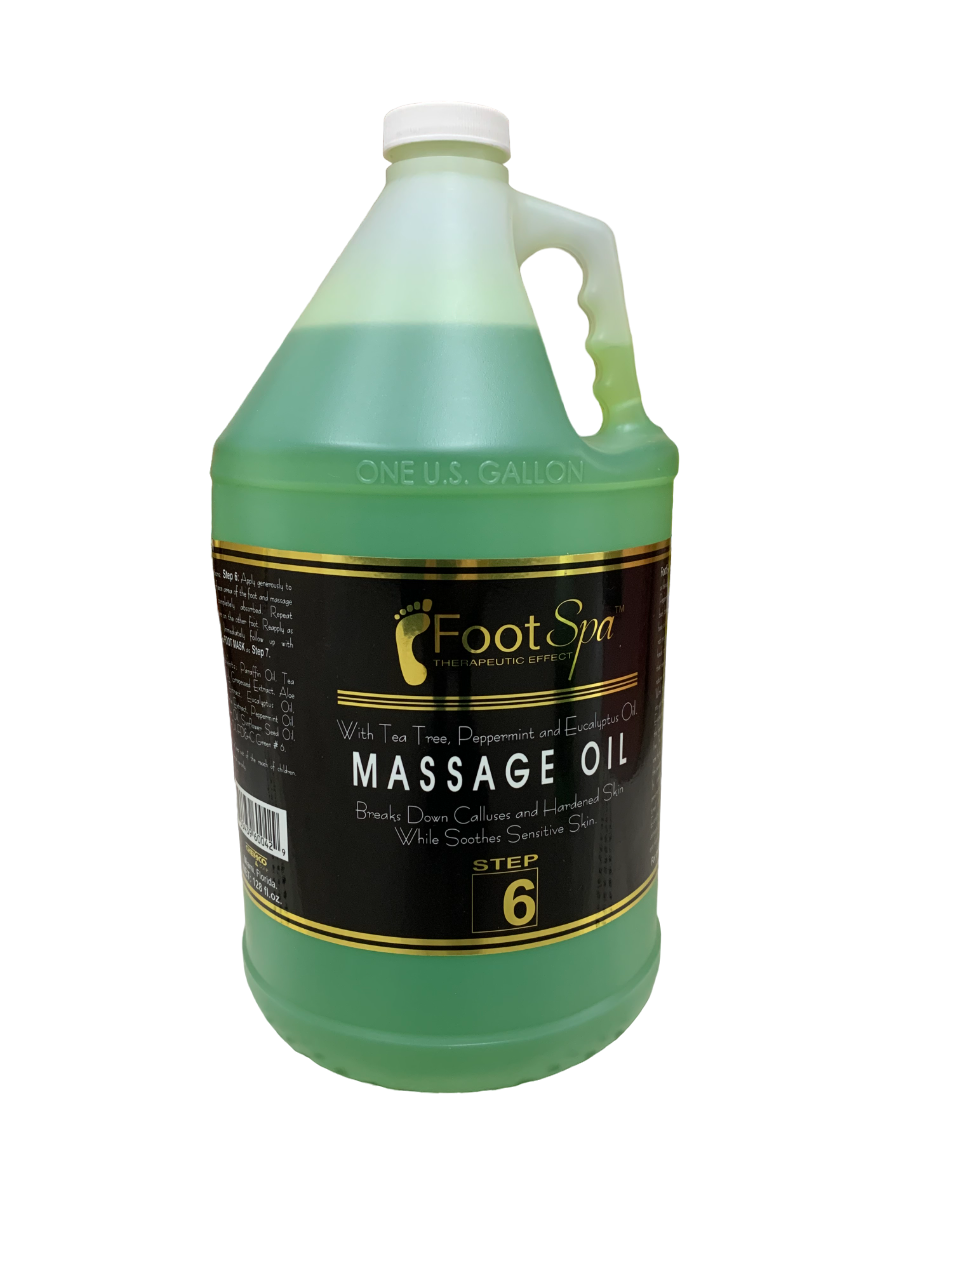 Foot Spa Massage Oil With Tea Tree, Peppermint and Eucalyptus Oil